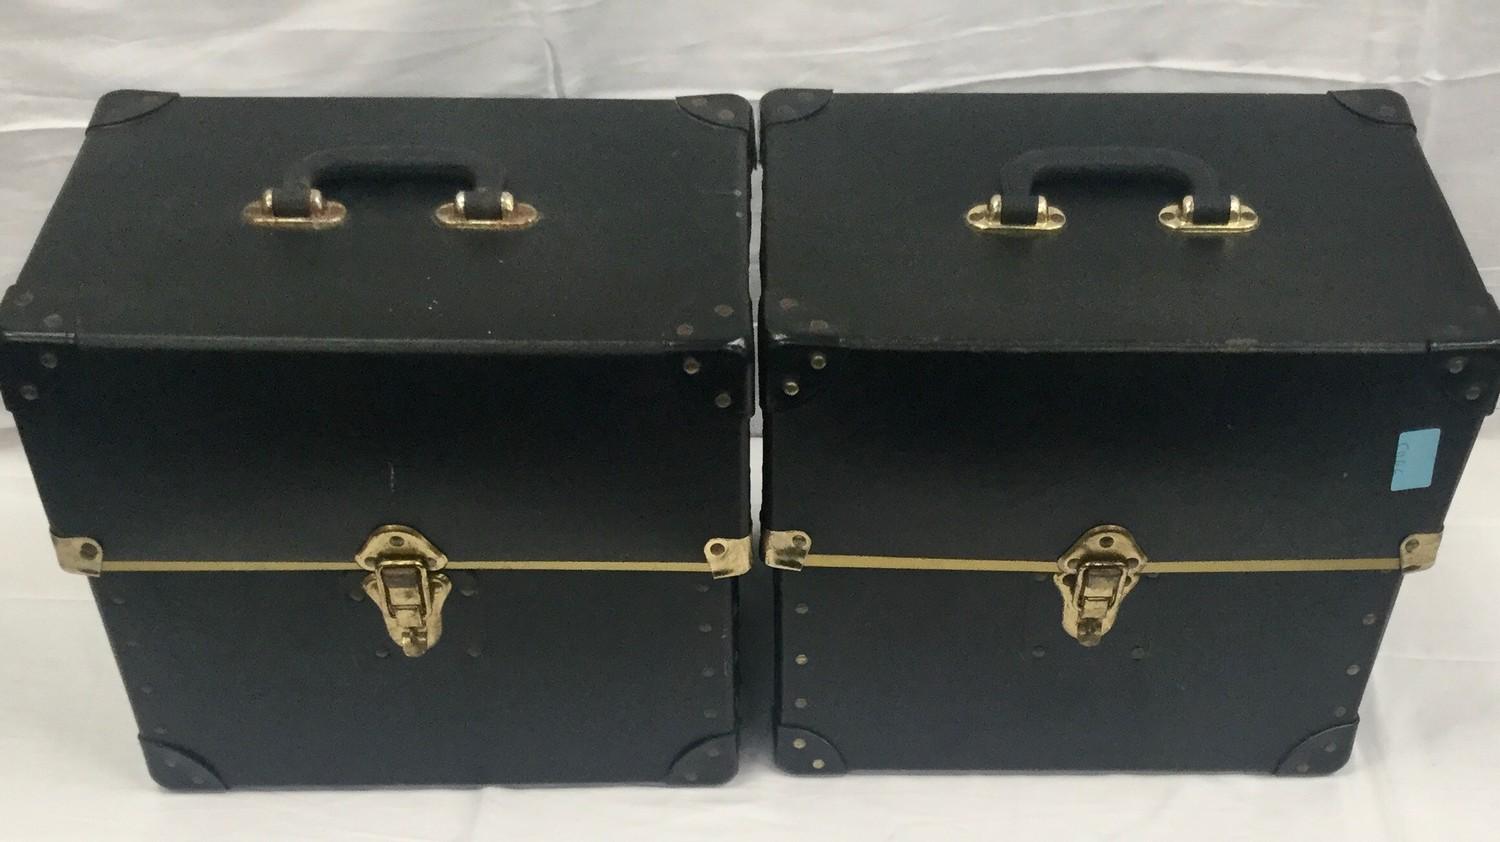 2 X 12" DJ CARRY CASES. Finished in black with brass trim and clasps we have 2 vinyl 12" carry cases